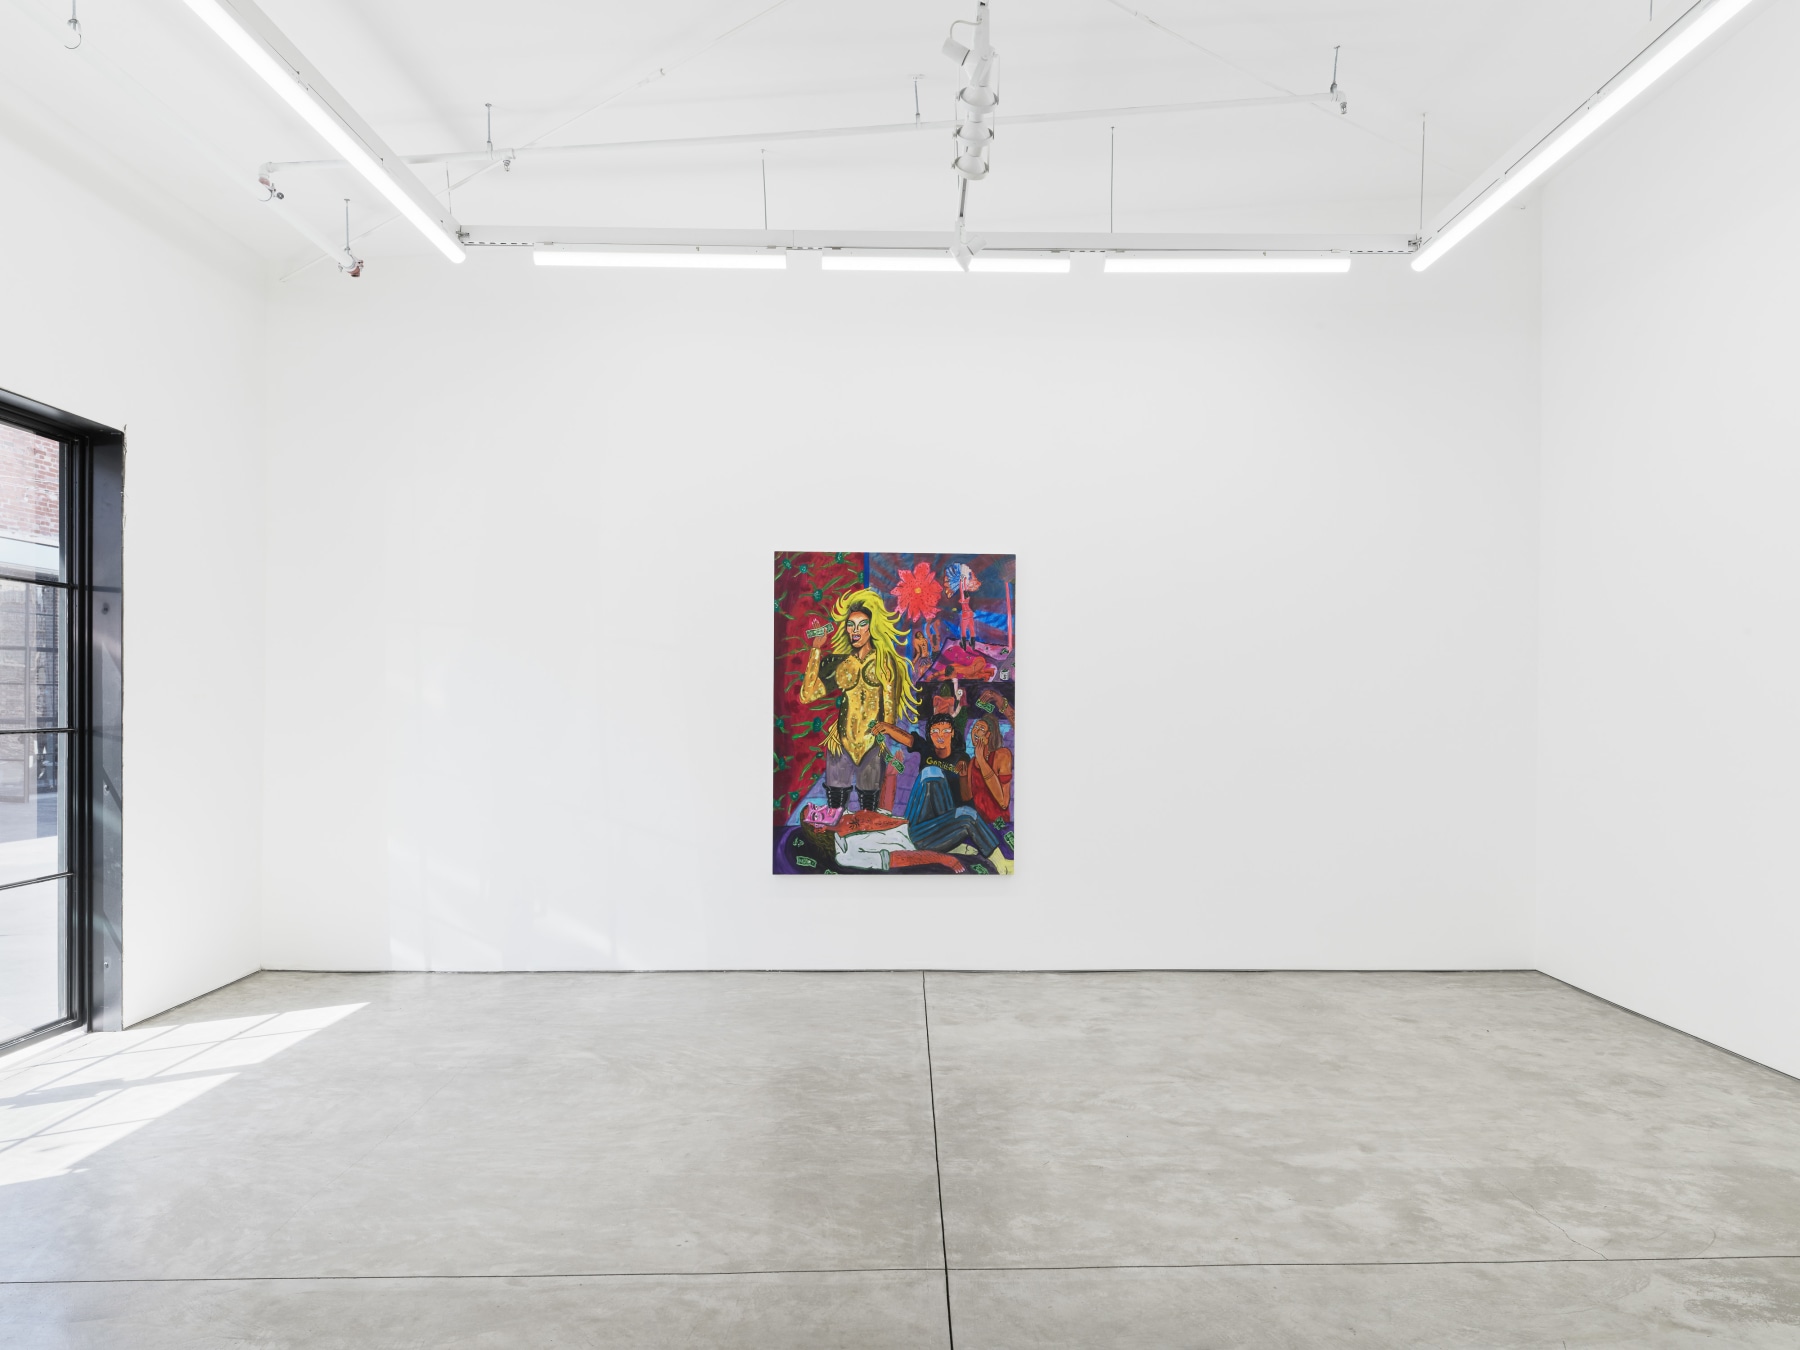 Installation view of Marcel Alcalá's exhibition "The Performance of Being" at Night Gallery 2023